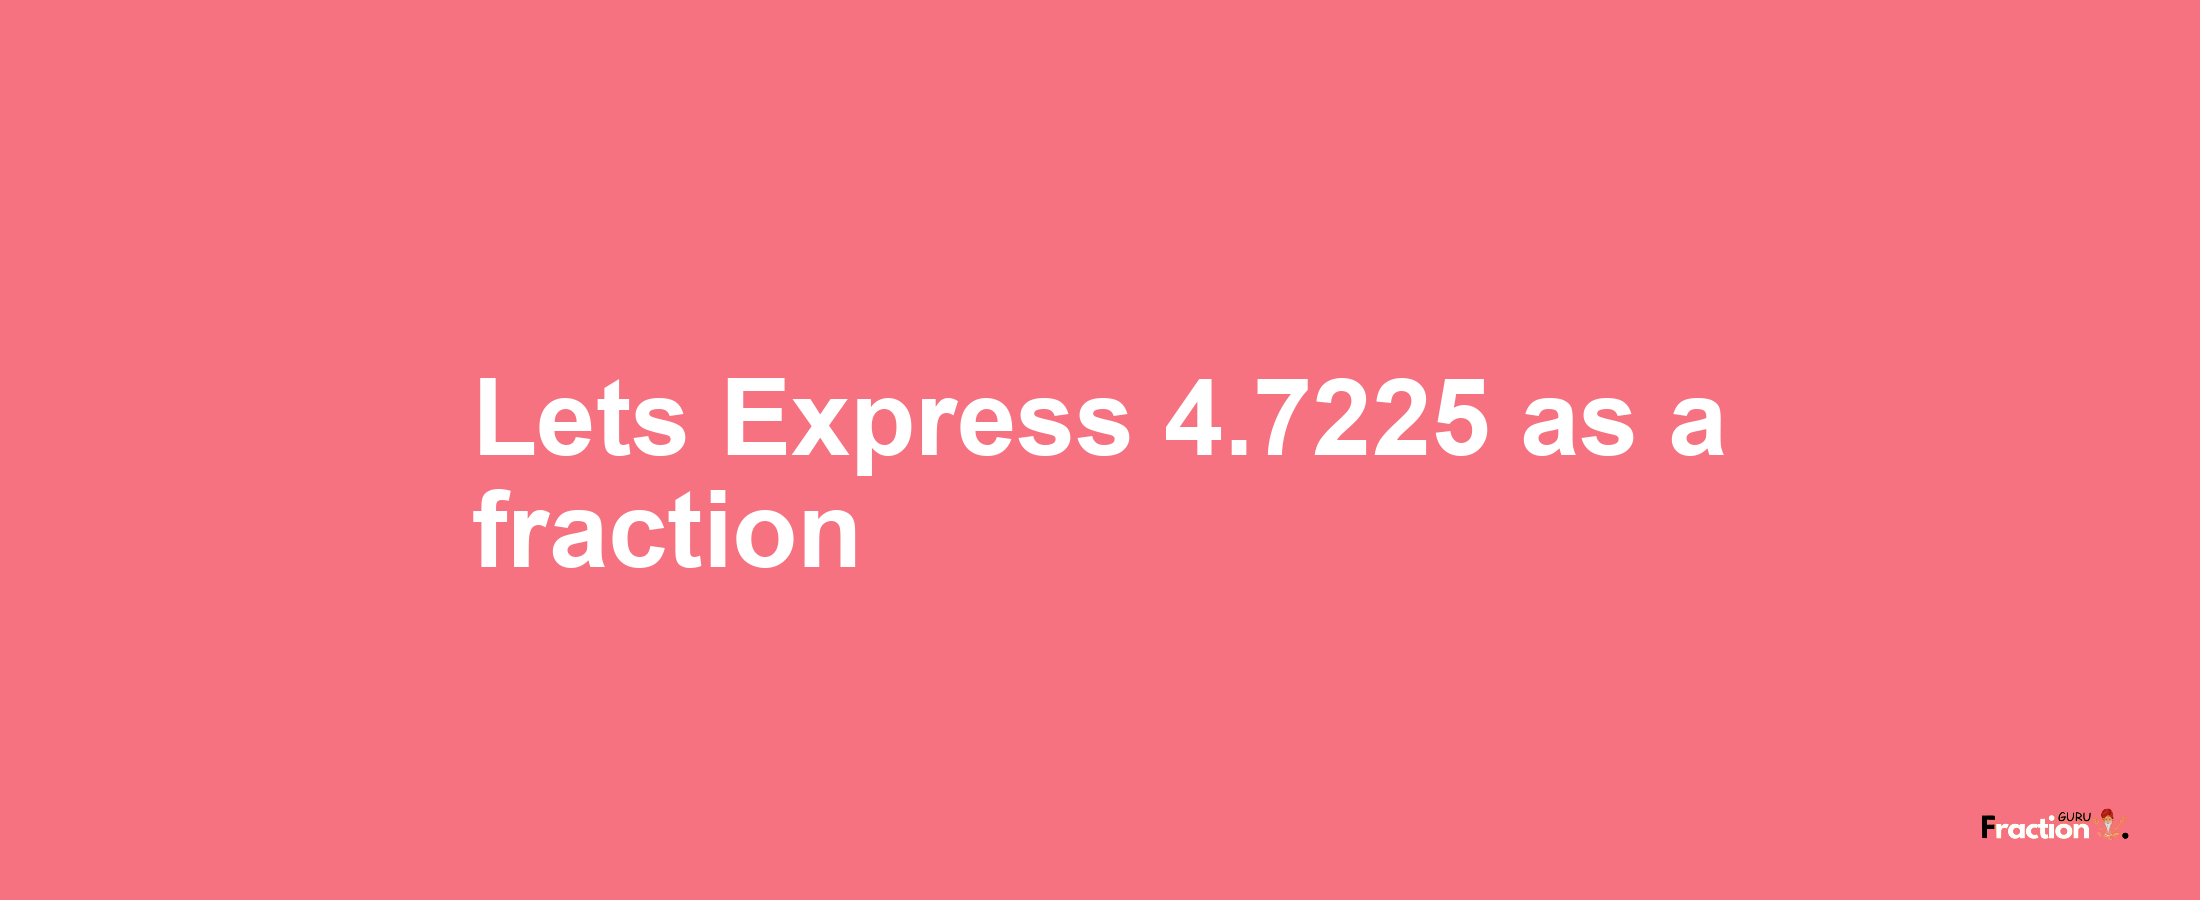 Lets Express 4.7225 as afraction